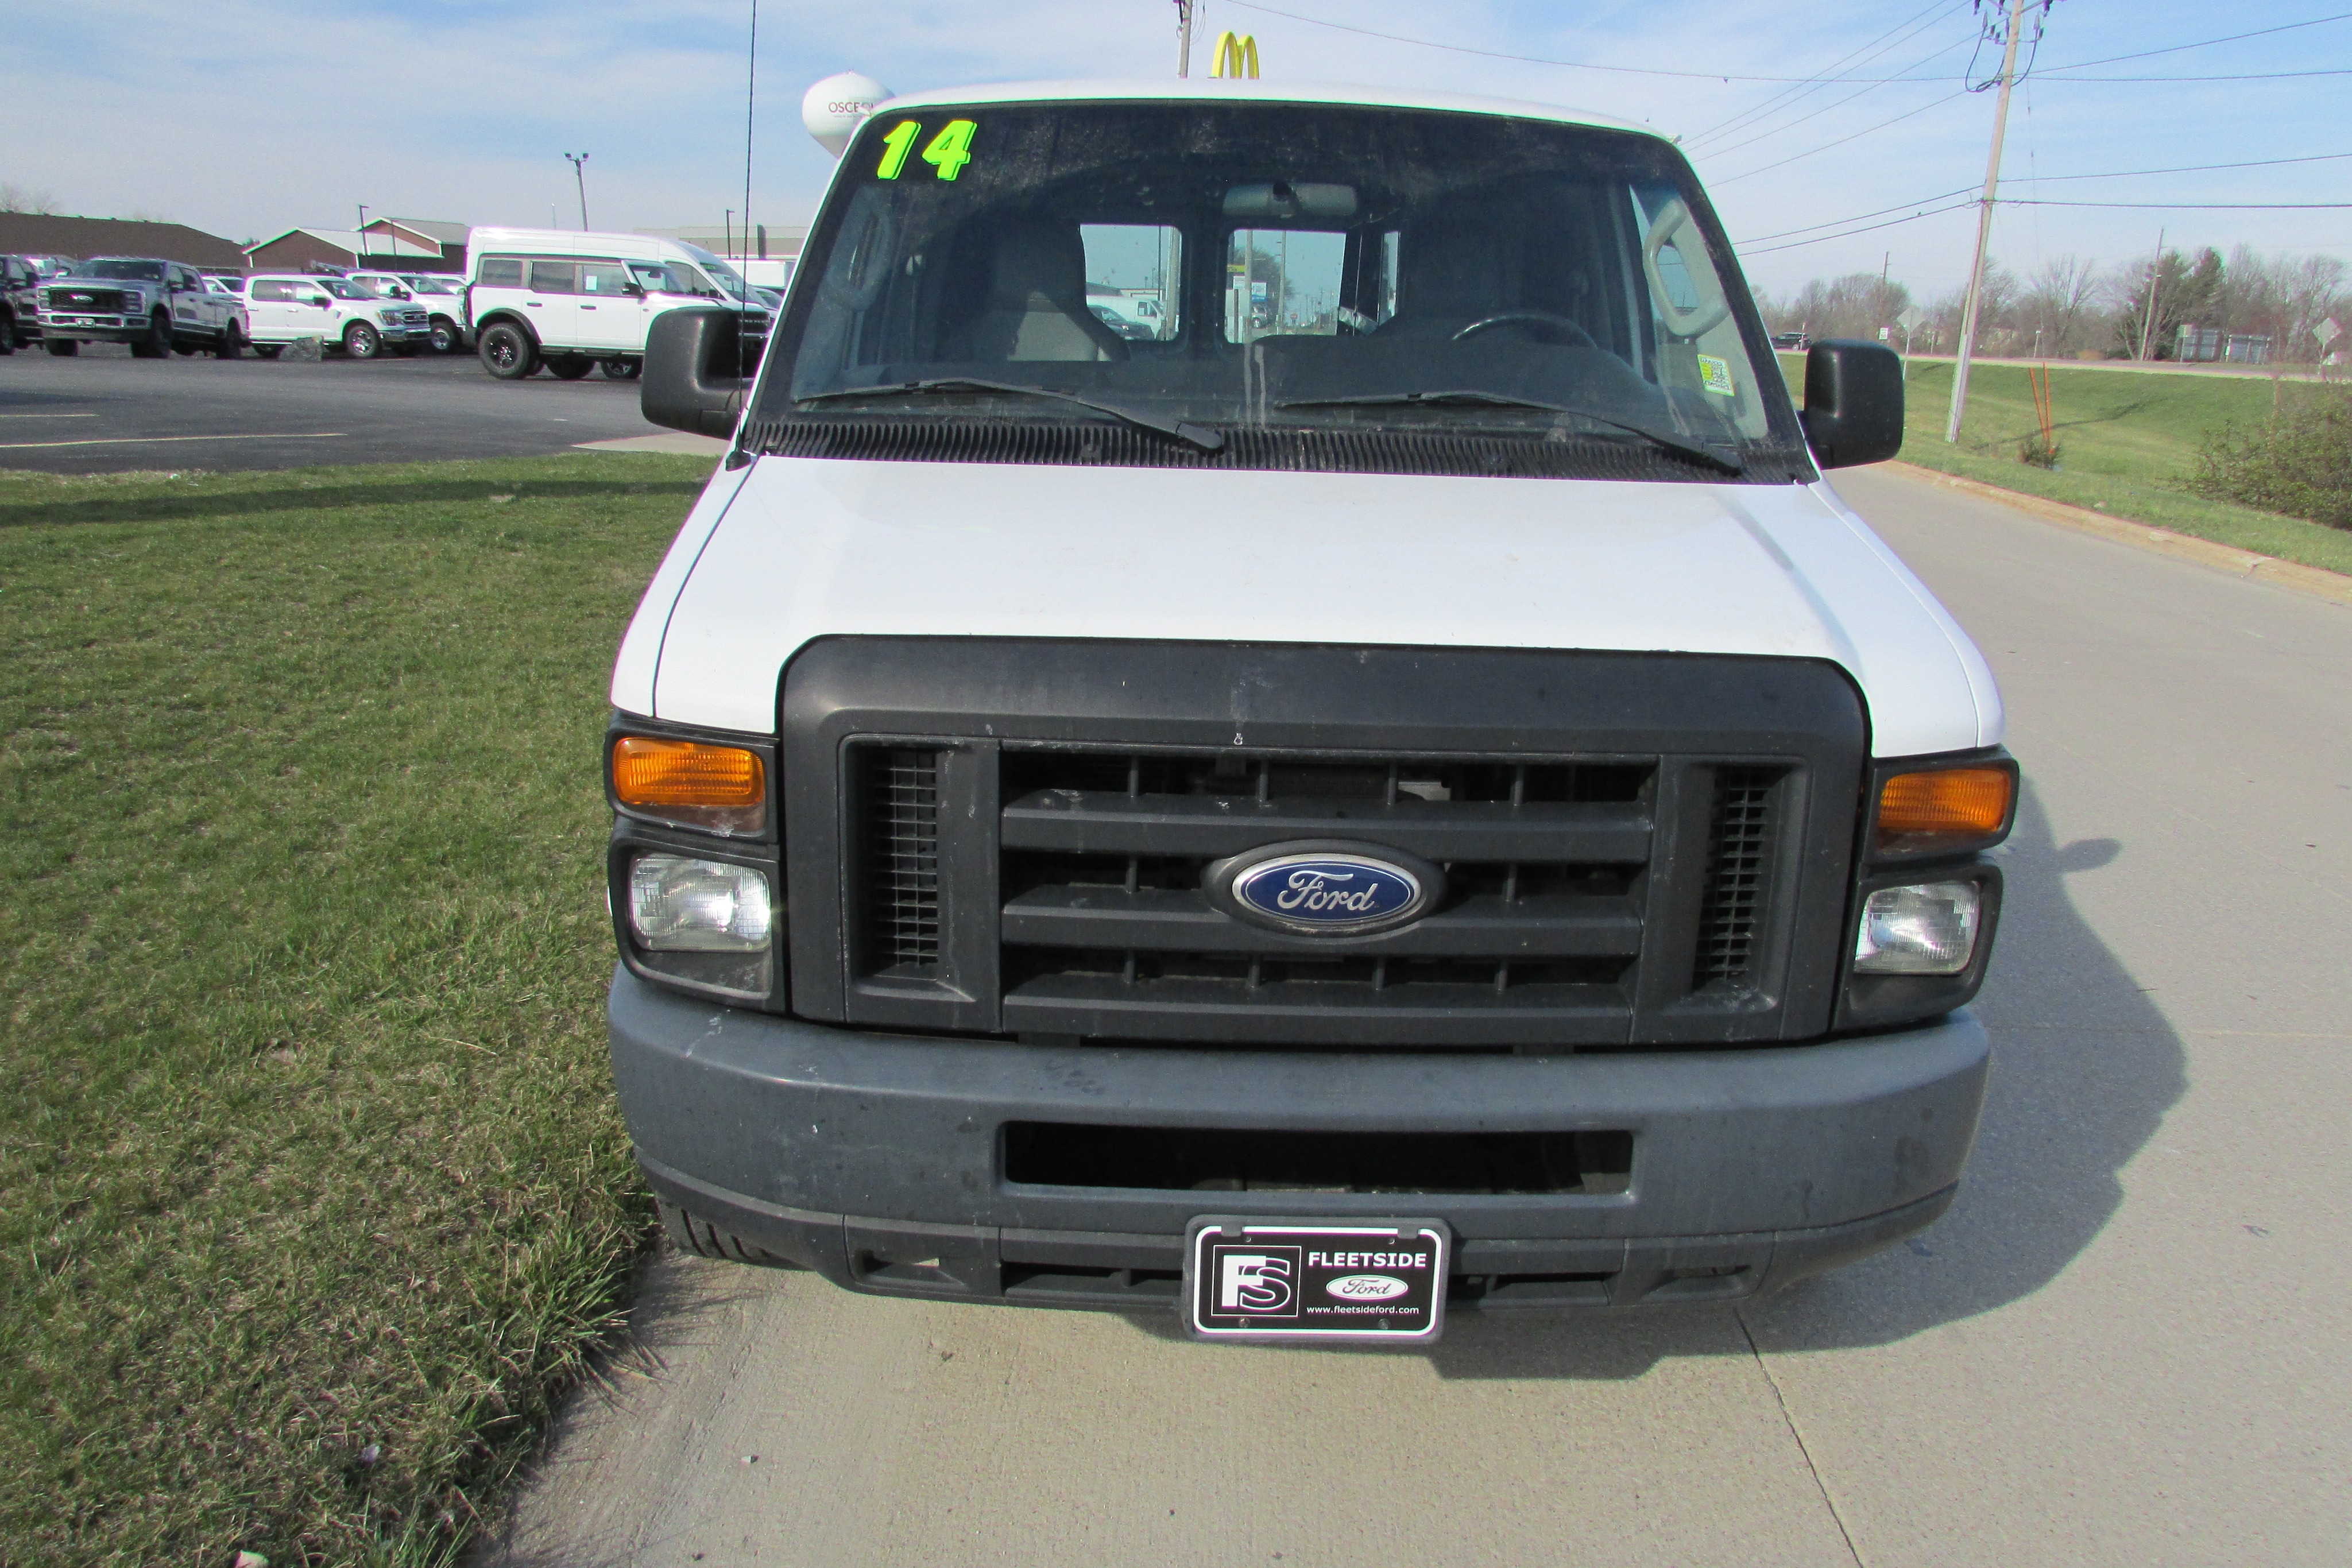 Used 2014 Ford E-Series Econoline Van Commercial with VIN 1FTNE2EW8EDA92619 for sale in Osceola, IA